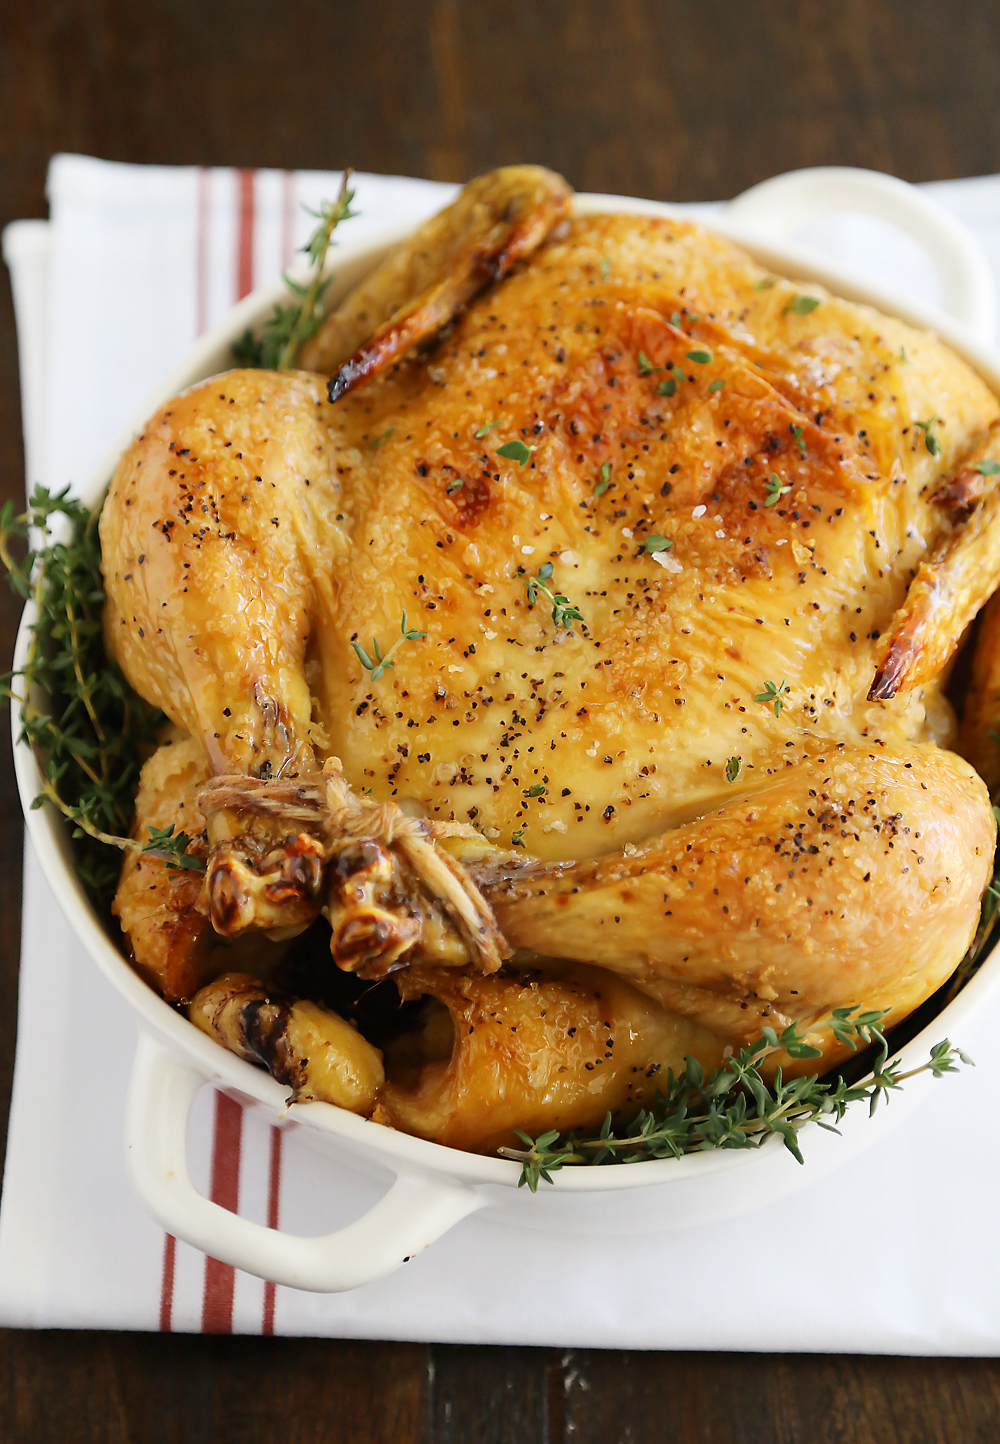 Thomas Keller [3-Ingredient] Roasted Chicken – So easy, crisp and juicy! No butter or oil. You’ll be amazed at the ingredients! Thecomfortofcooking.com